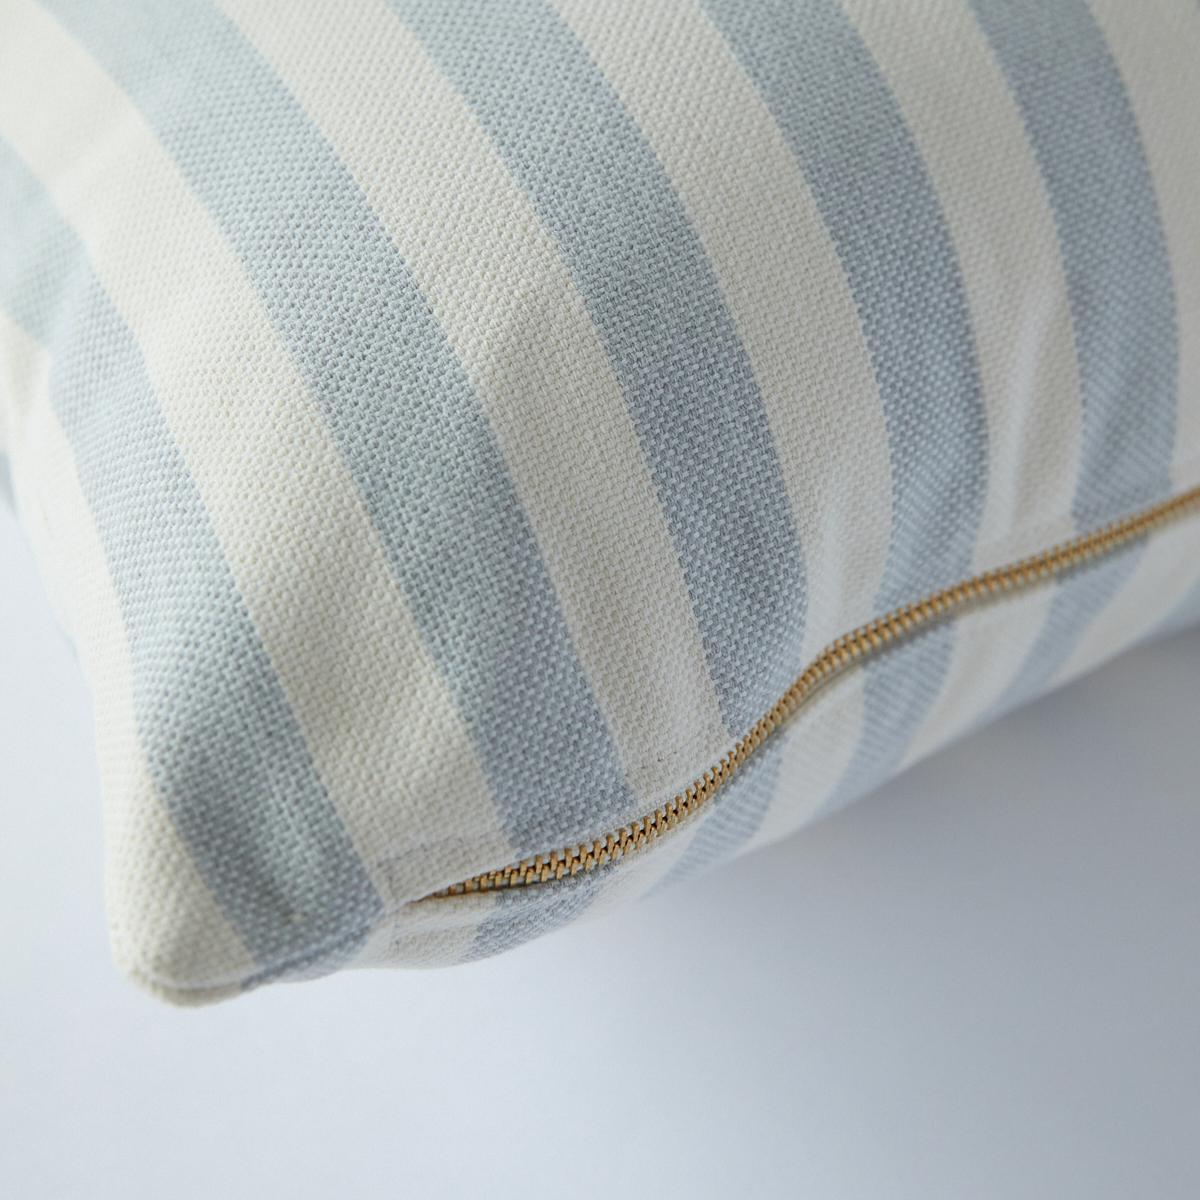 This pillow features Even Stripe Indoor/Outdoor by Caroline Z Hurley with a knife edge finish. We looked to our favorite artists like Agnes Martin and Louise Bourgeois as inspiration for this bolster pillow. A perfect medium stripe rendered in a